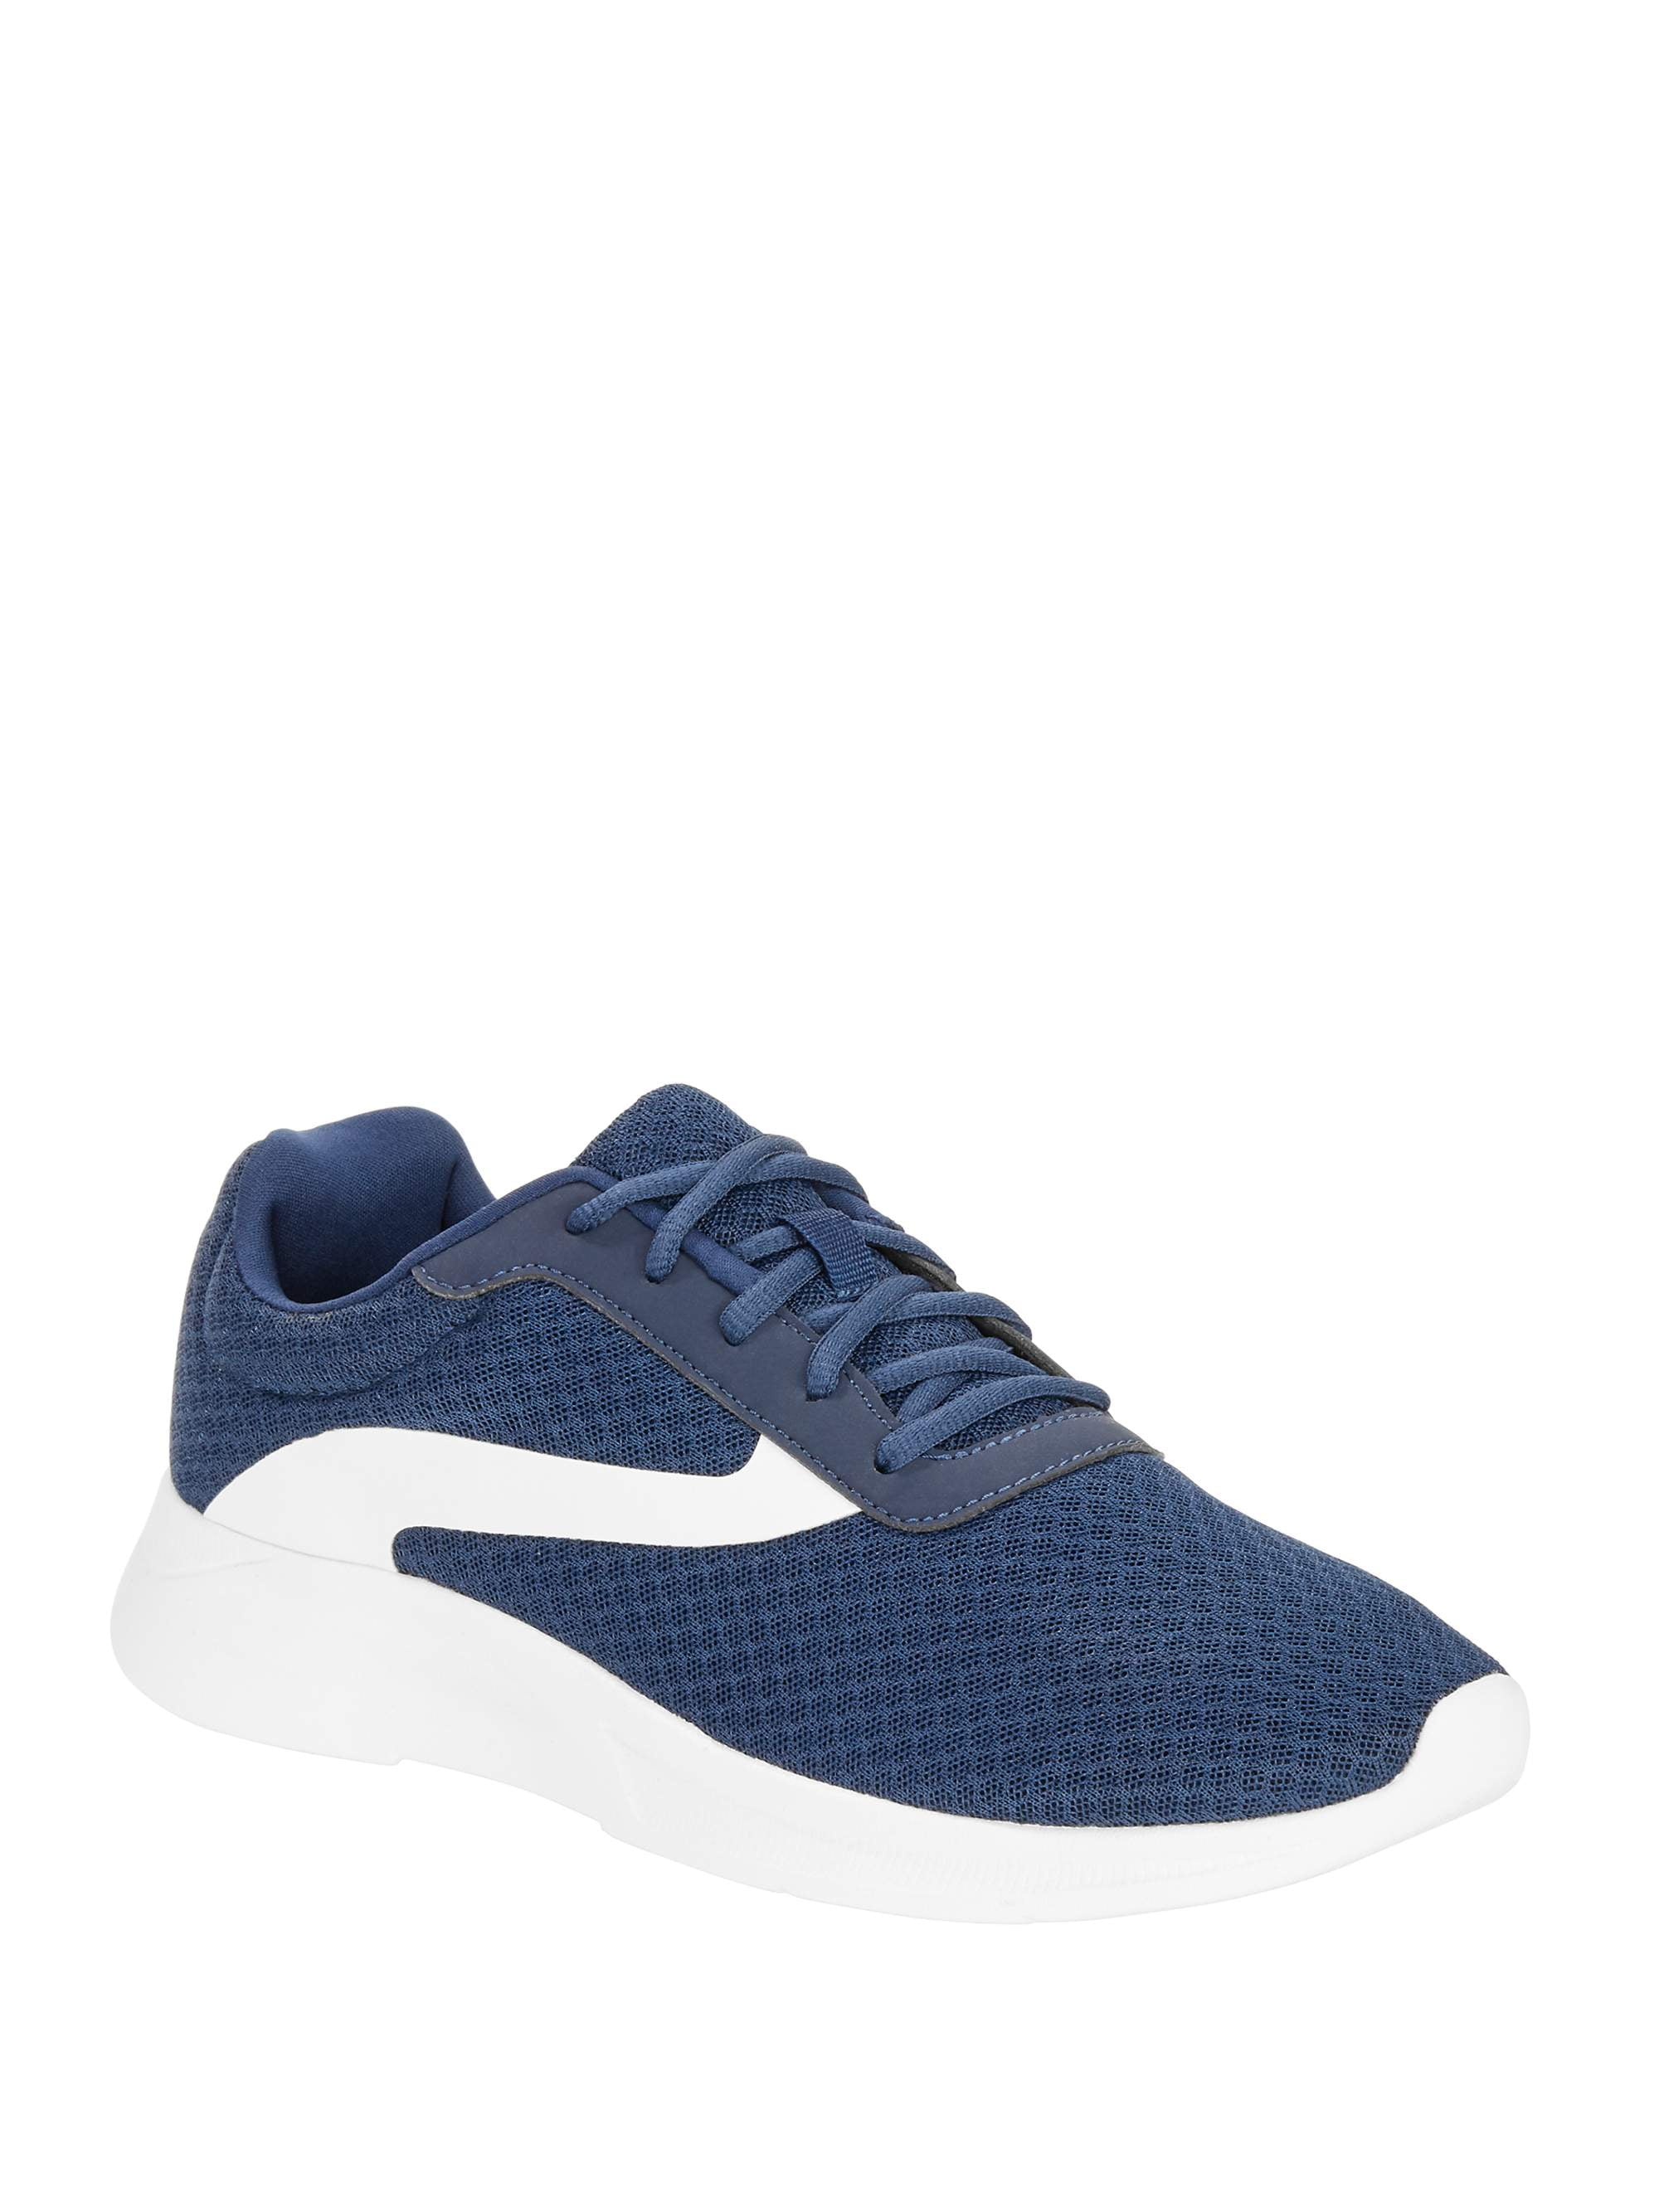 Gray Breathable Mesh Athletic Works Boy's  Running Shoes Blue 